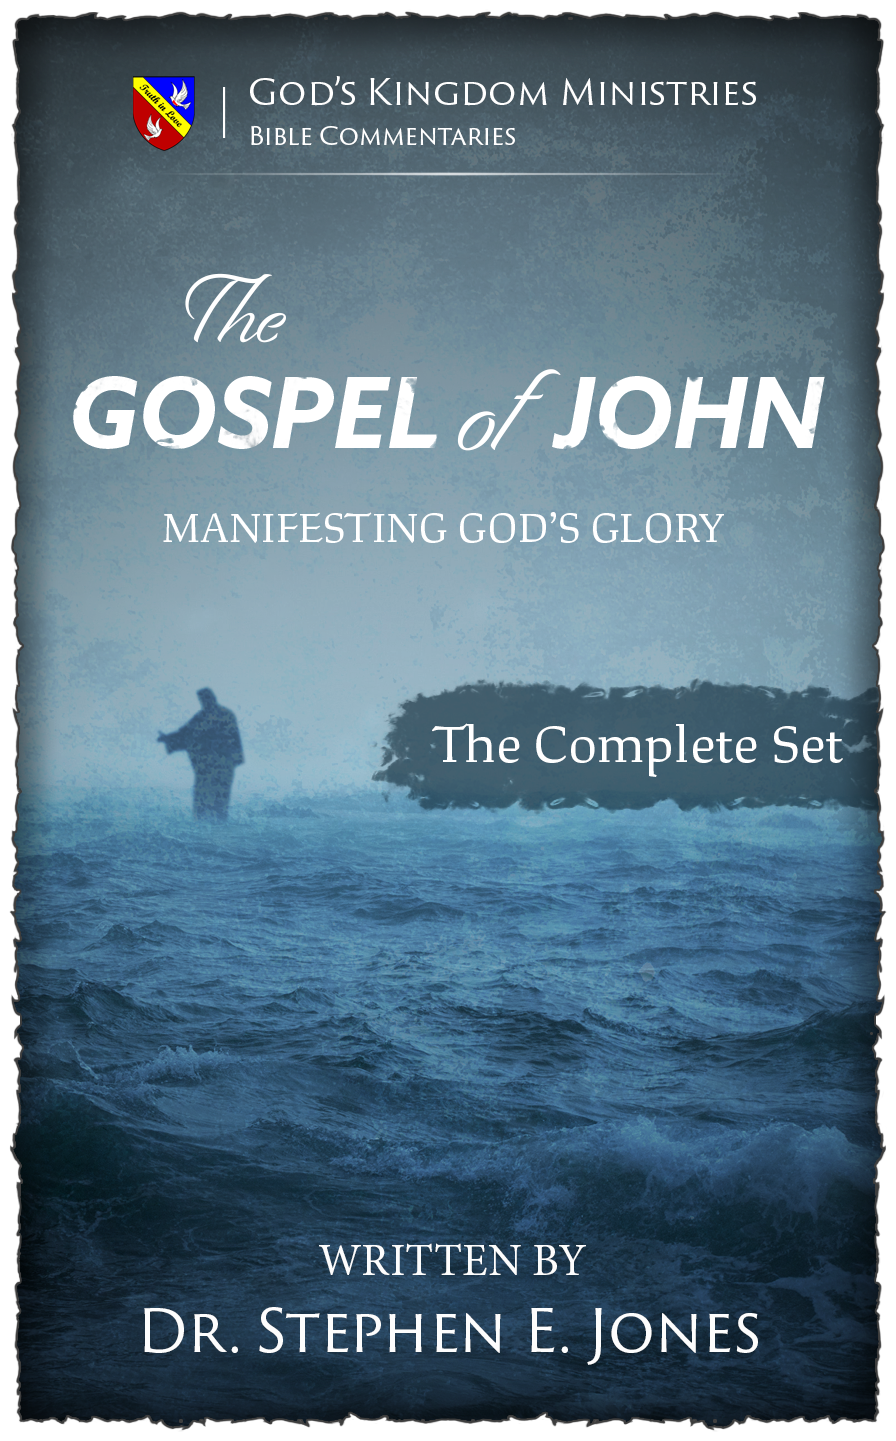 The-Gospel-of-John-Cover-The-Complete-Set.png